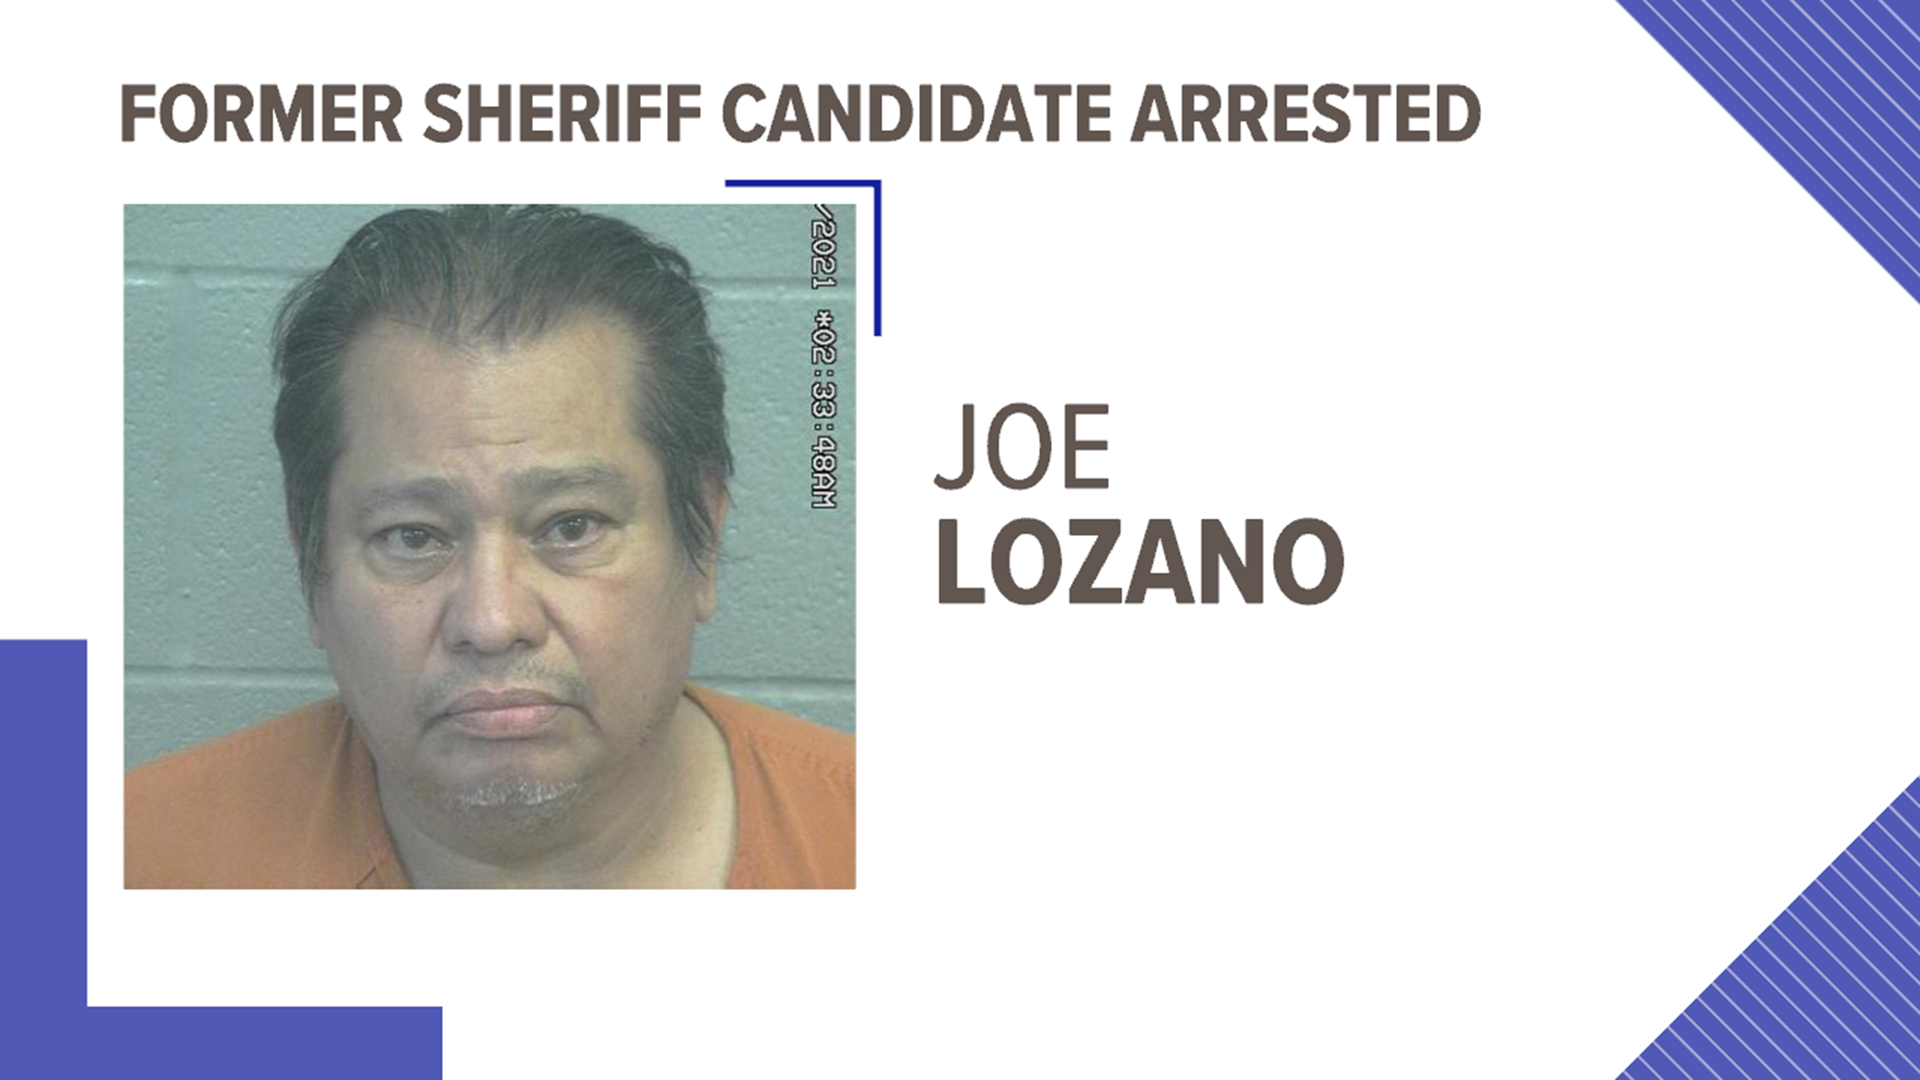 In 2020, Lozano ran for sheriff against Rory McKinney, Tom Hain, and David Criner, and he did not win.